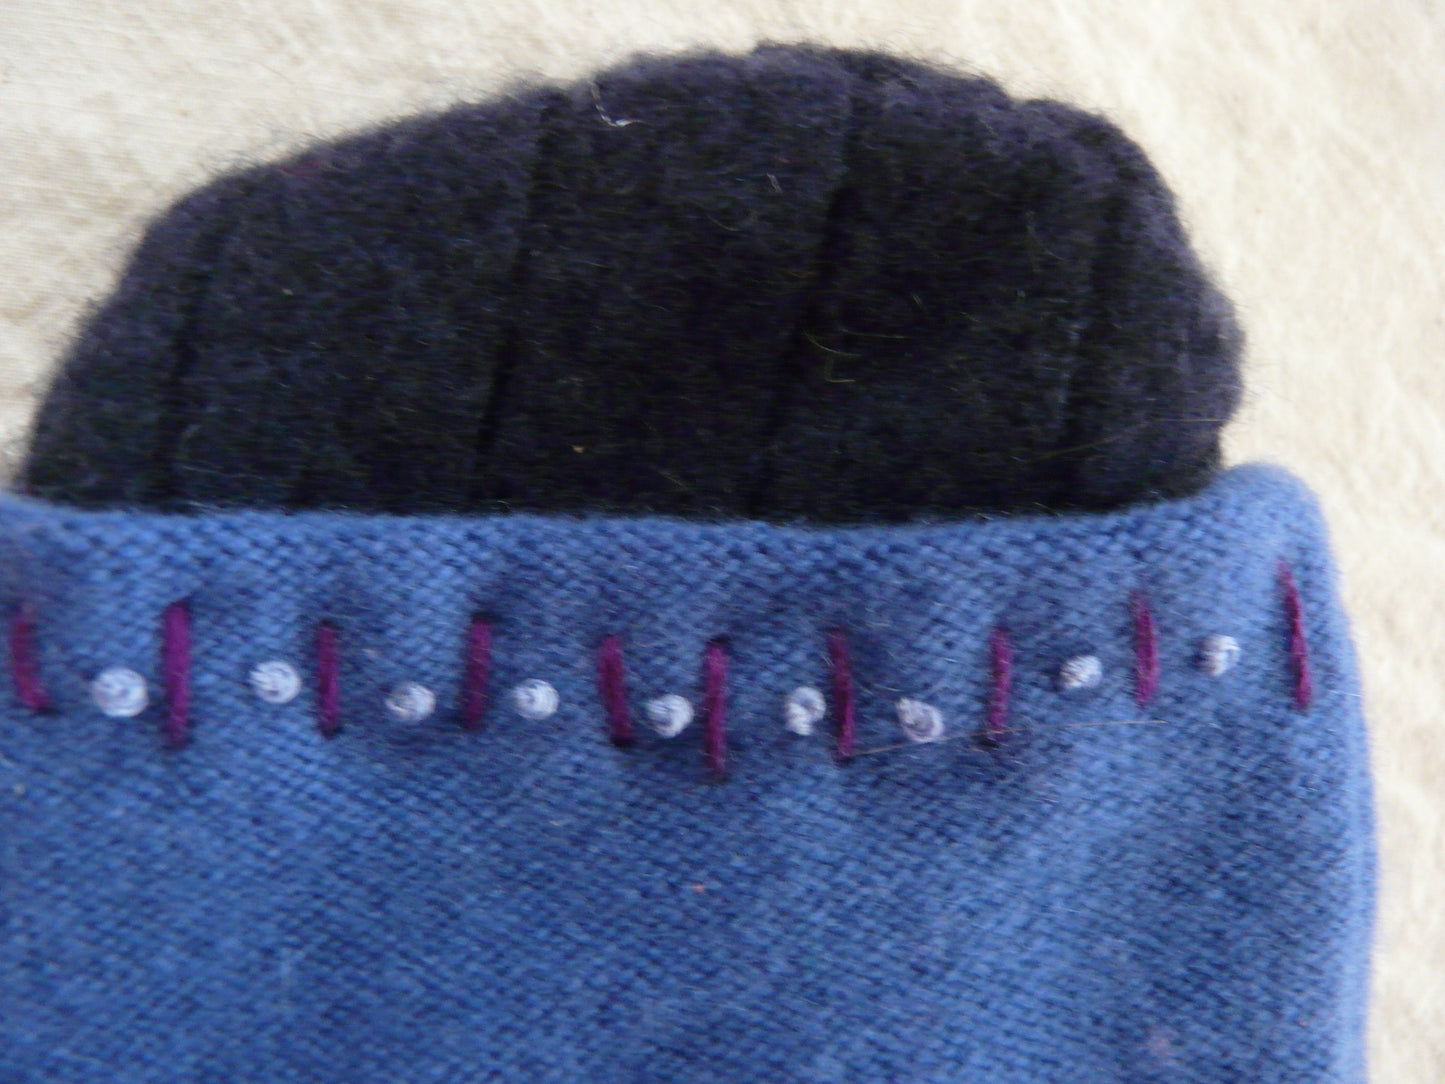 Single Cashmere mittens -blue and purple